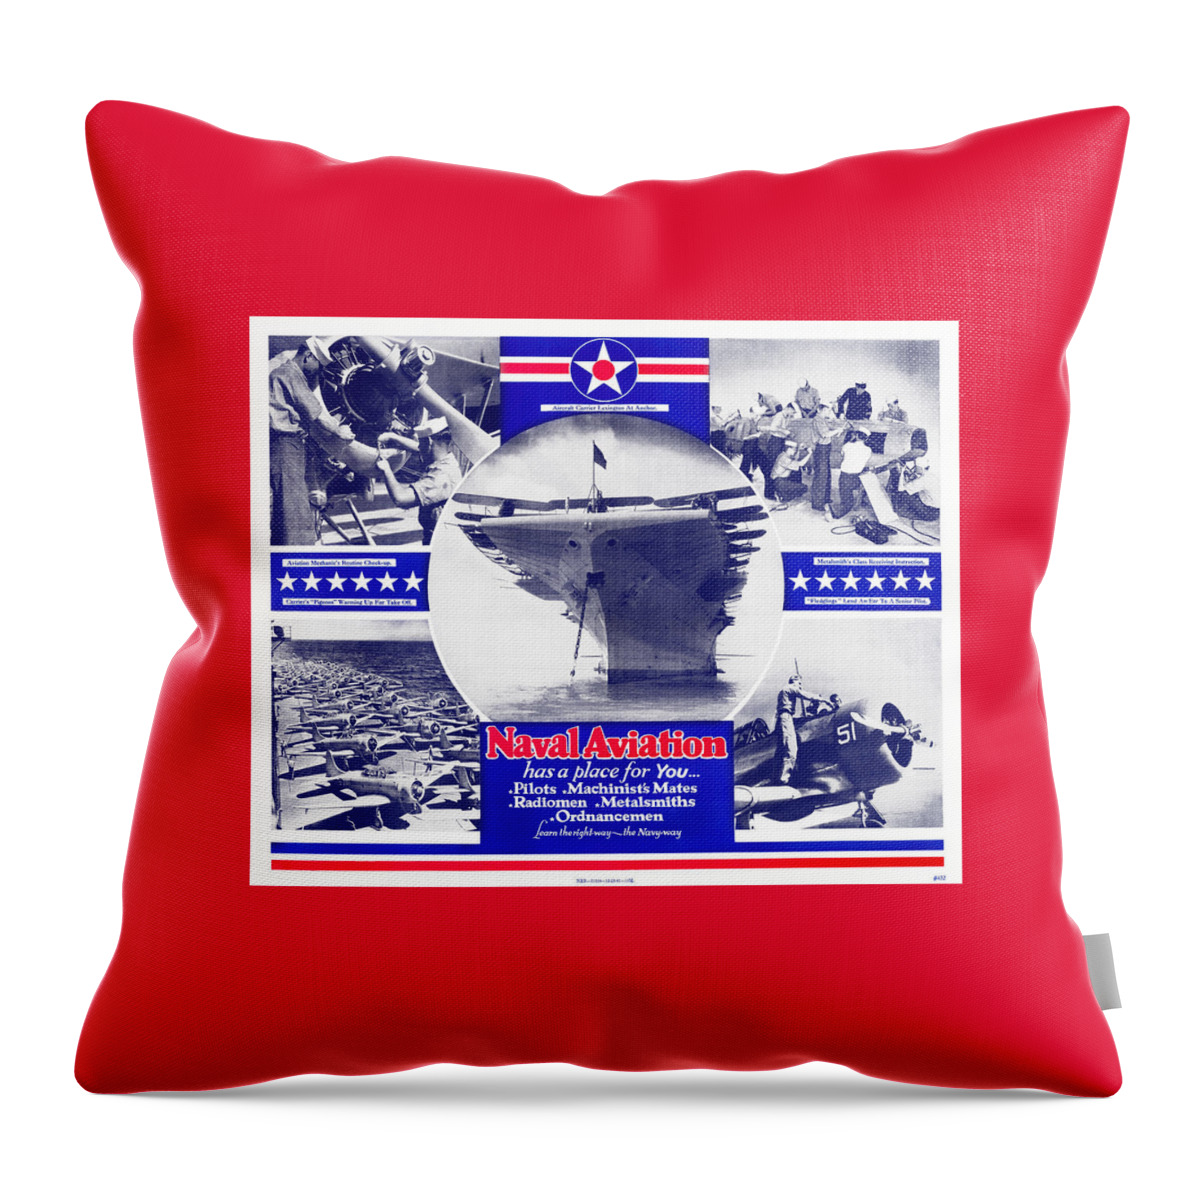 United States Navy Throw Pillow featuring the mixed media Naval Aviation Has A Place For You - World War Two Recruiting by War Is Hell Store